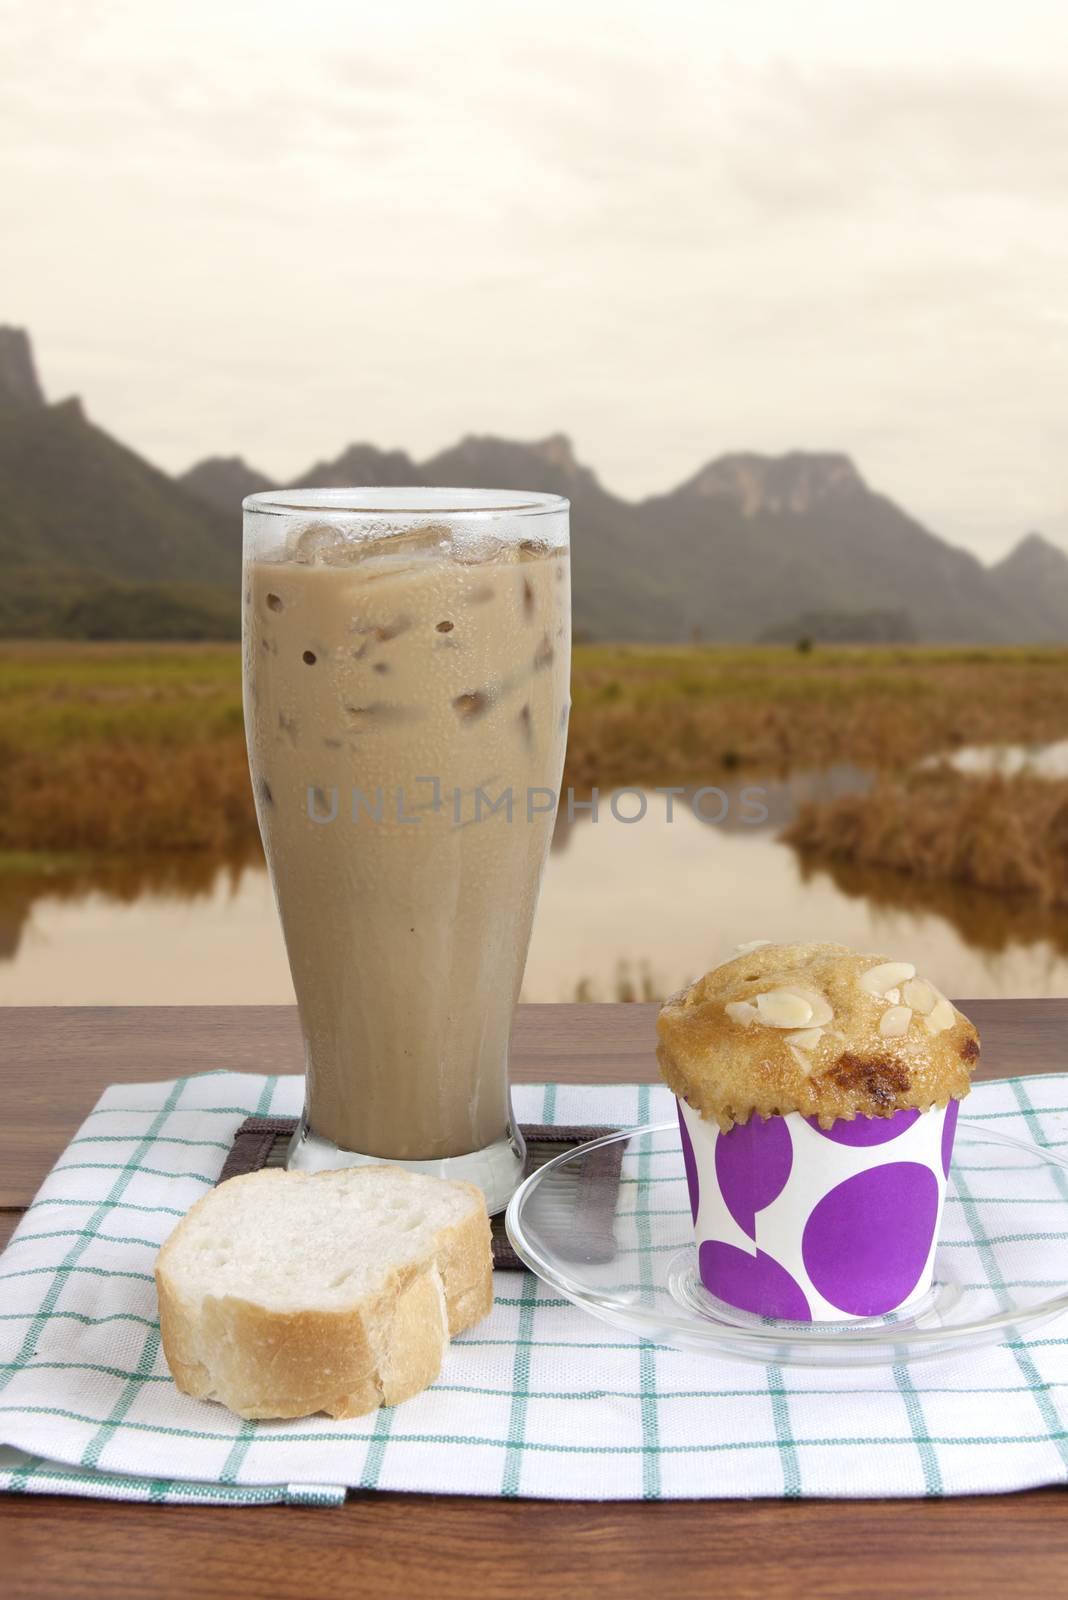 Cocoa chocolate smoothie in glass and French bread baguette and muffin in the morning. Nature background